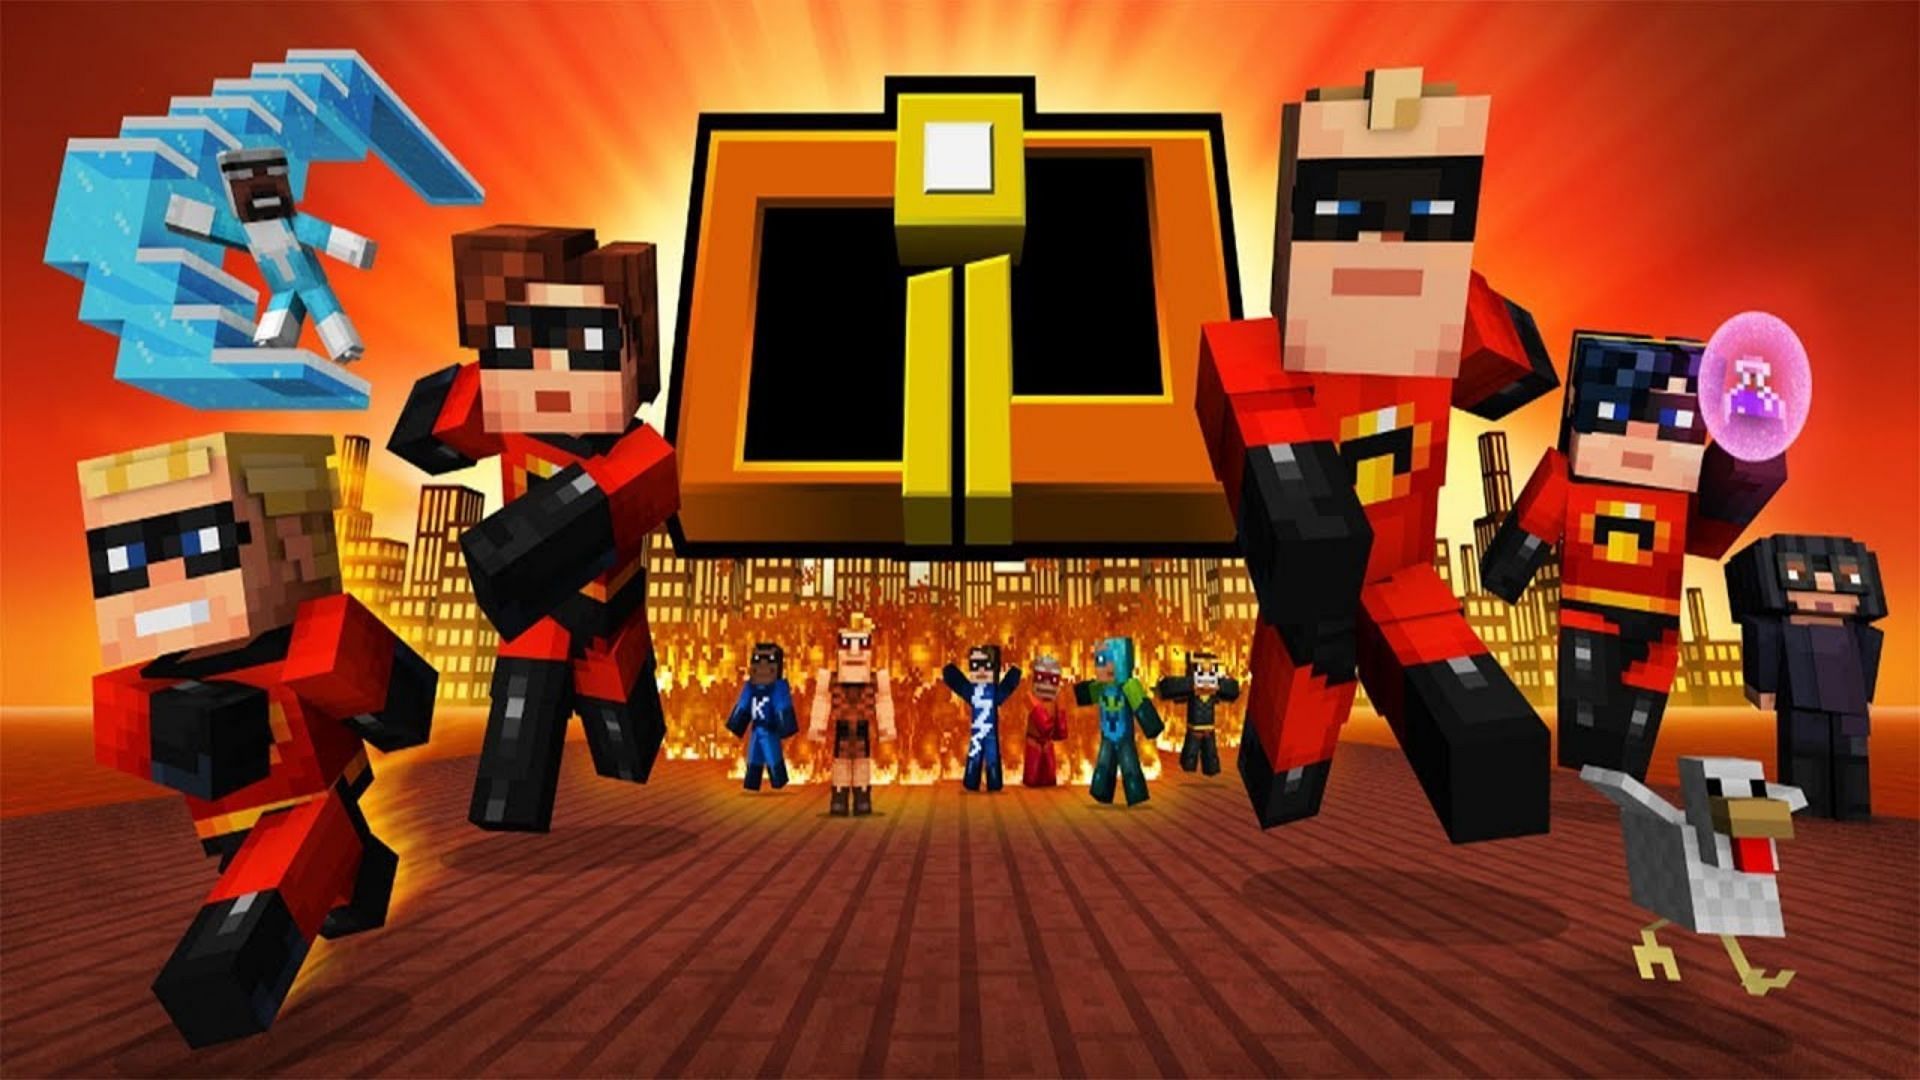 The Incredibles is another famous film series that has its own skin pack on the Minecraft Marketplace. (Image via Mojang)